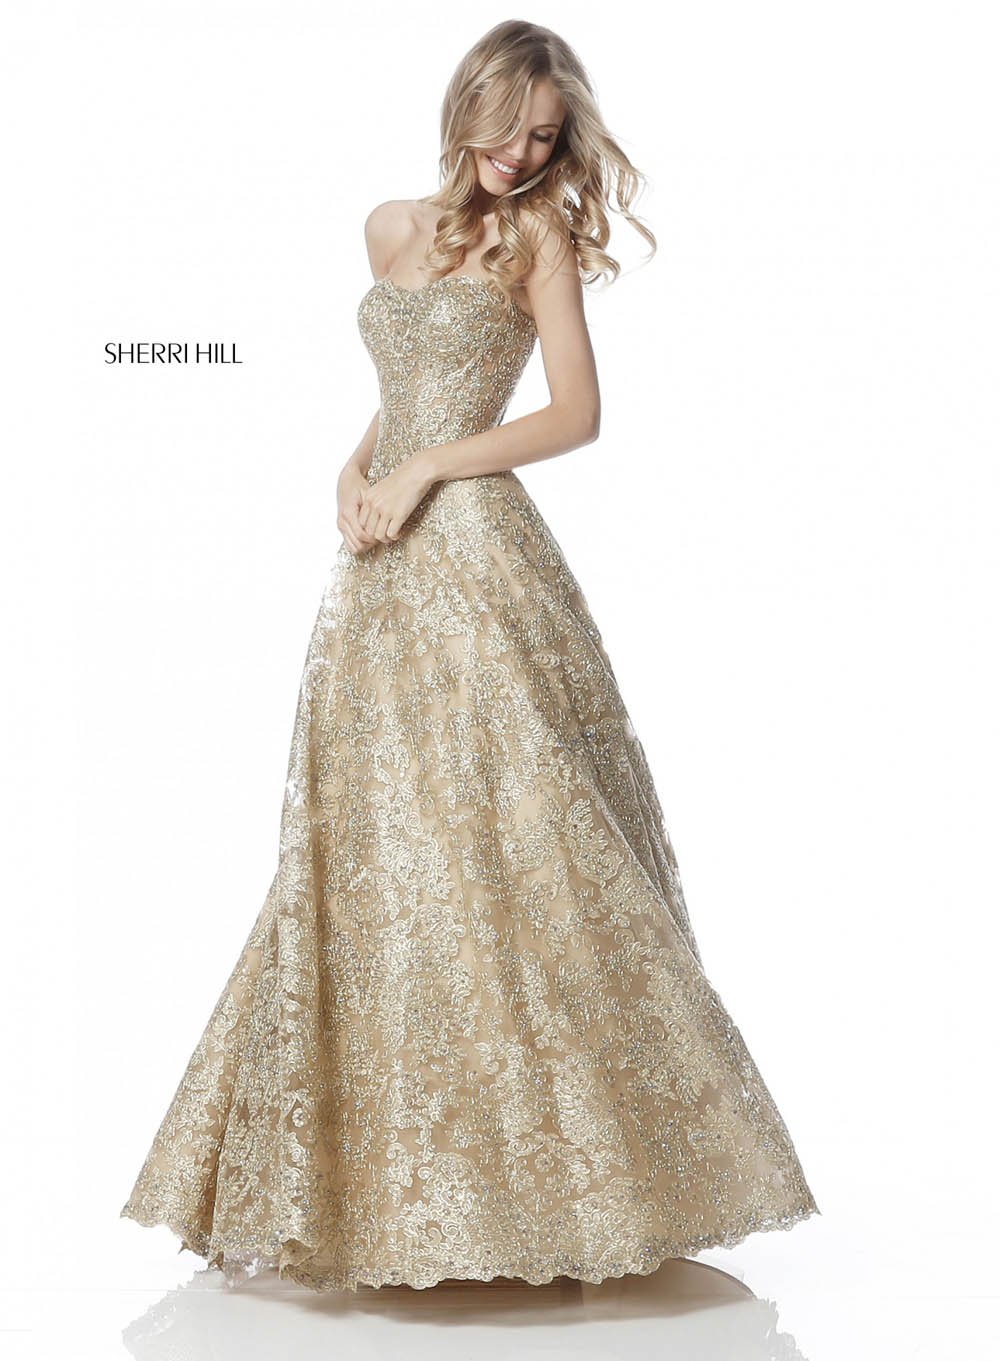 Sherri Hill 51572 dress images in these colors: Gold, Silver, Light Blue, Black, Ivory.